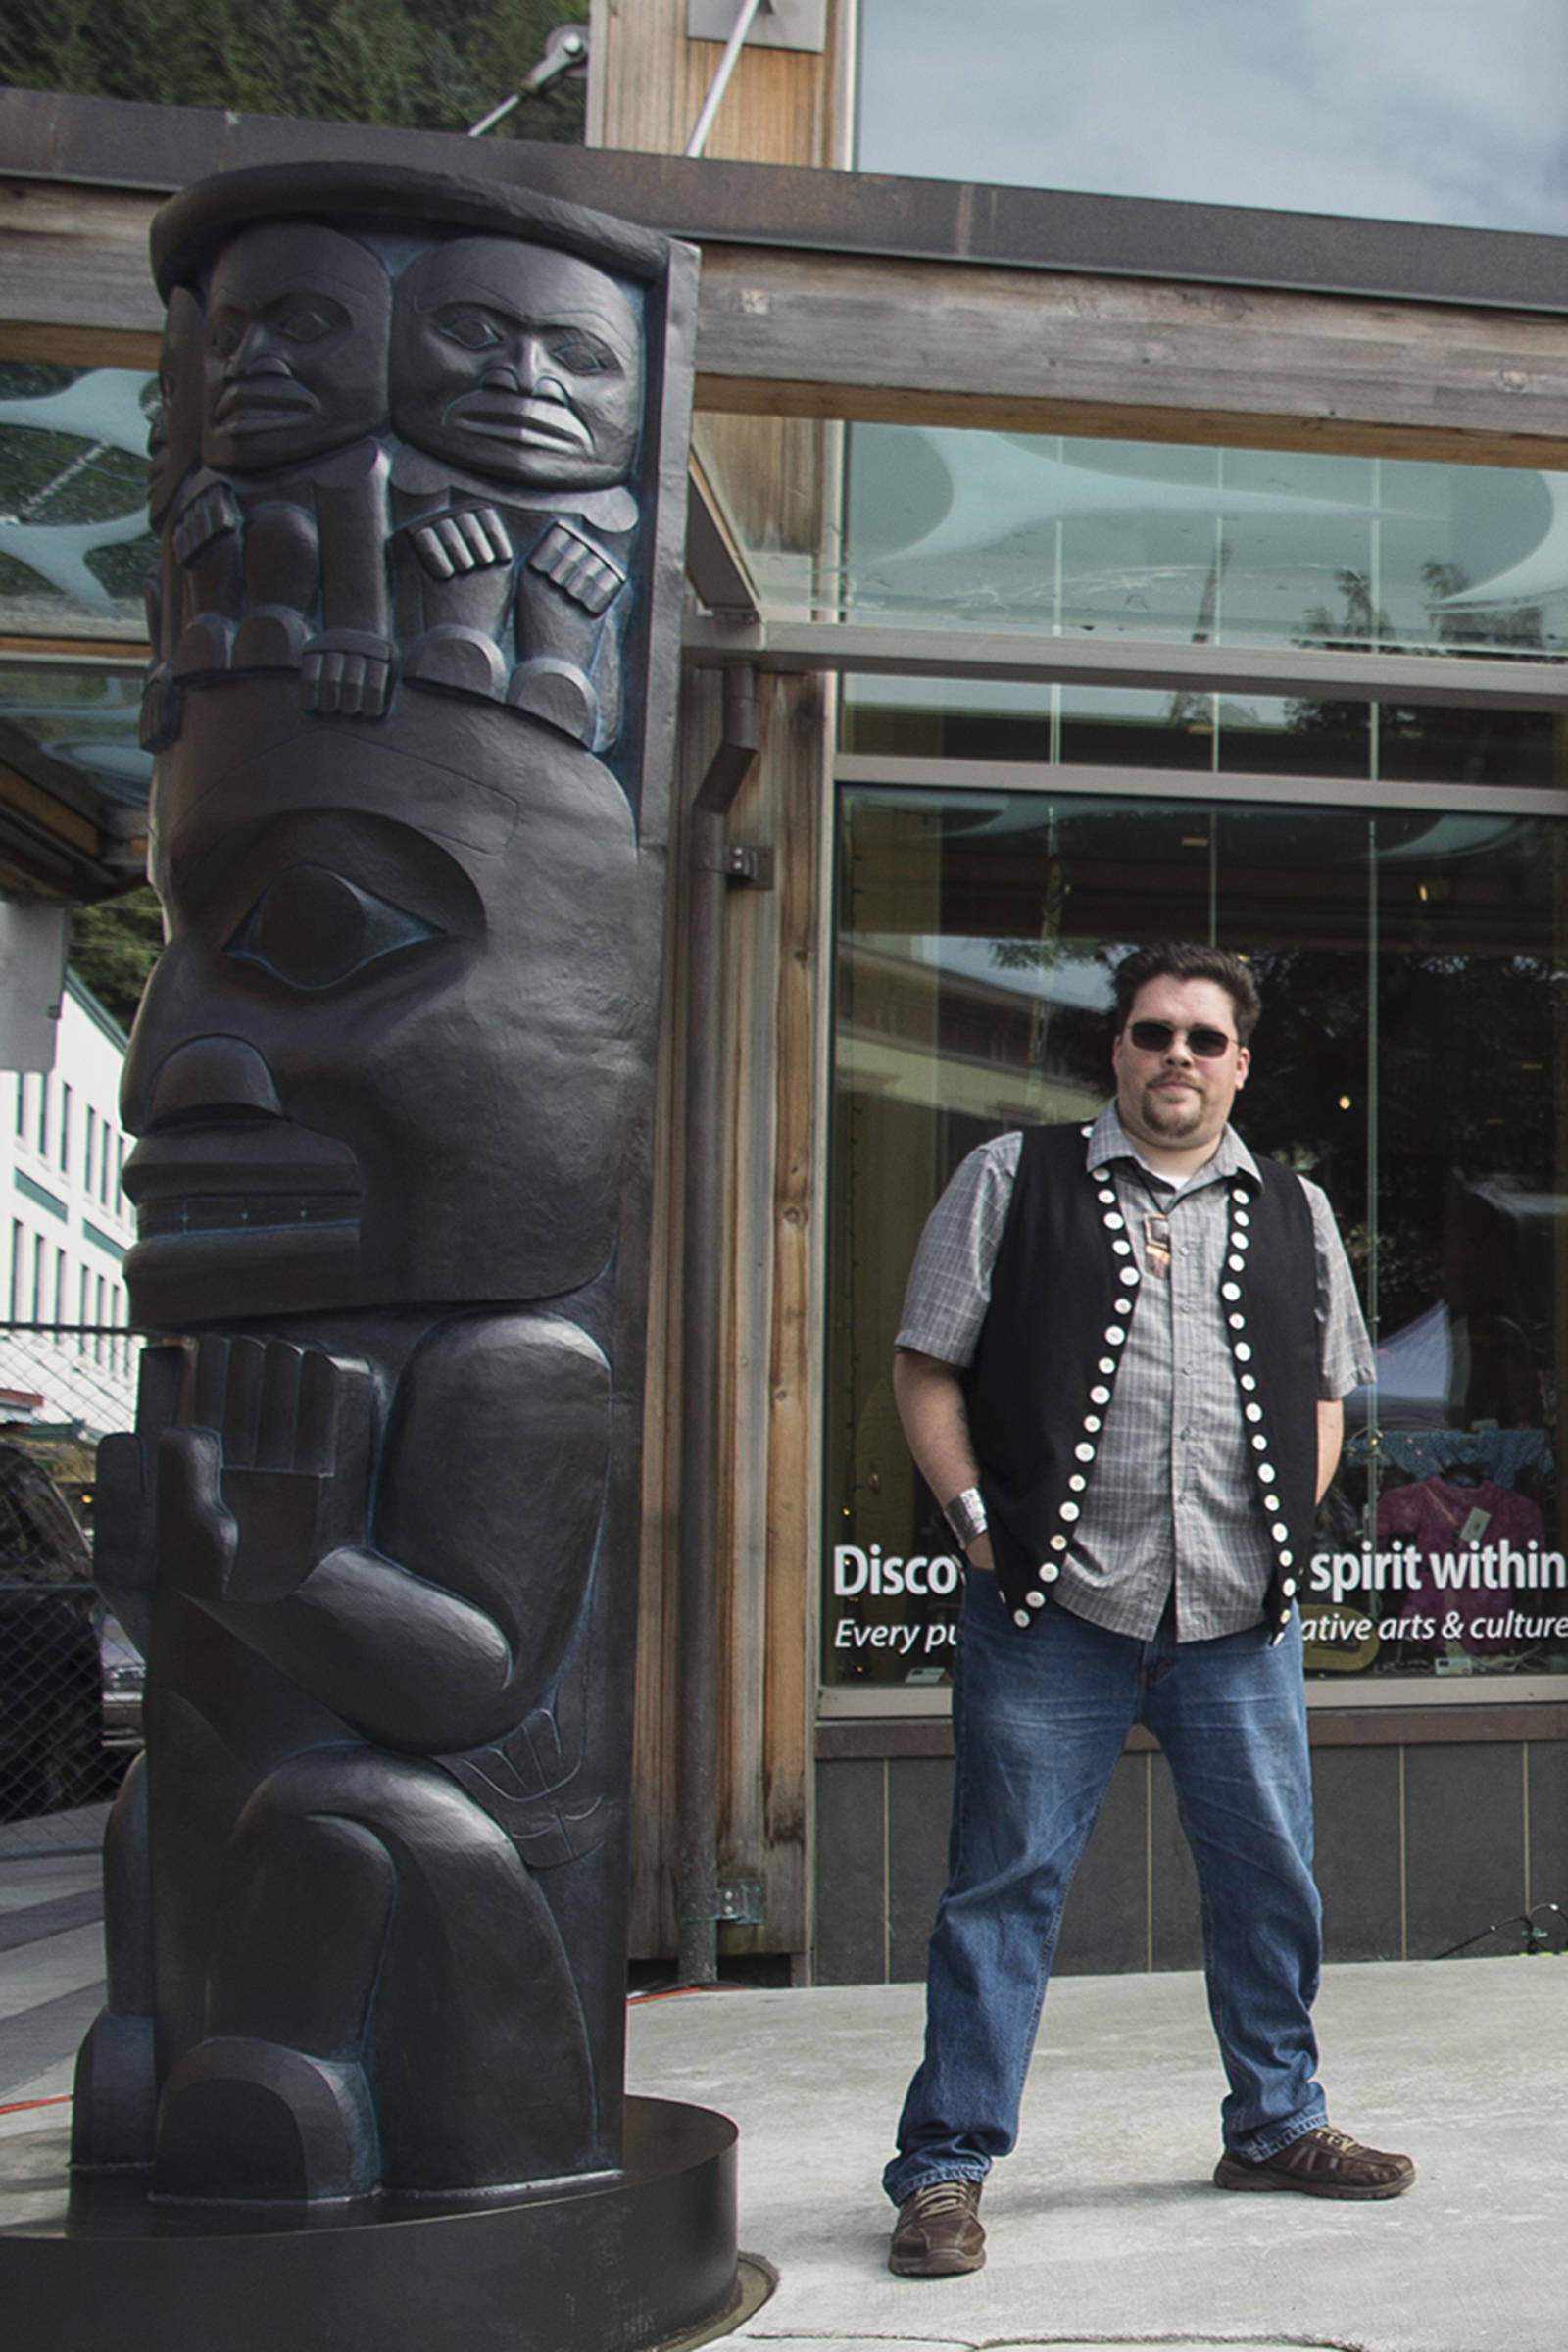 Tsimshian artist David R. Boxley stands by their bronze house posts during an unveiling ceremony in front of the Walter Soboleff Center by Sealaska Heritage Institute on Sunday, Aug. 26, 2018. (Michael Penn | Juneau Empire File)